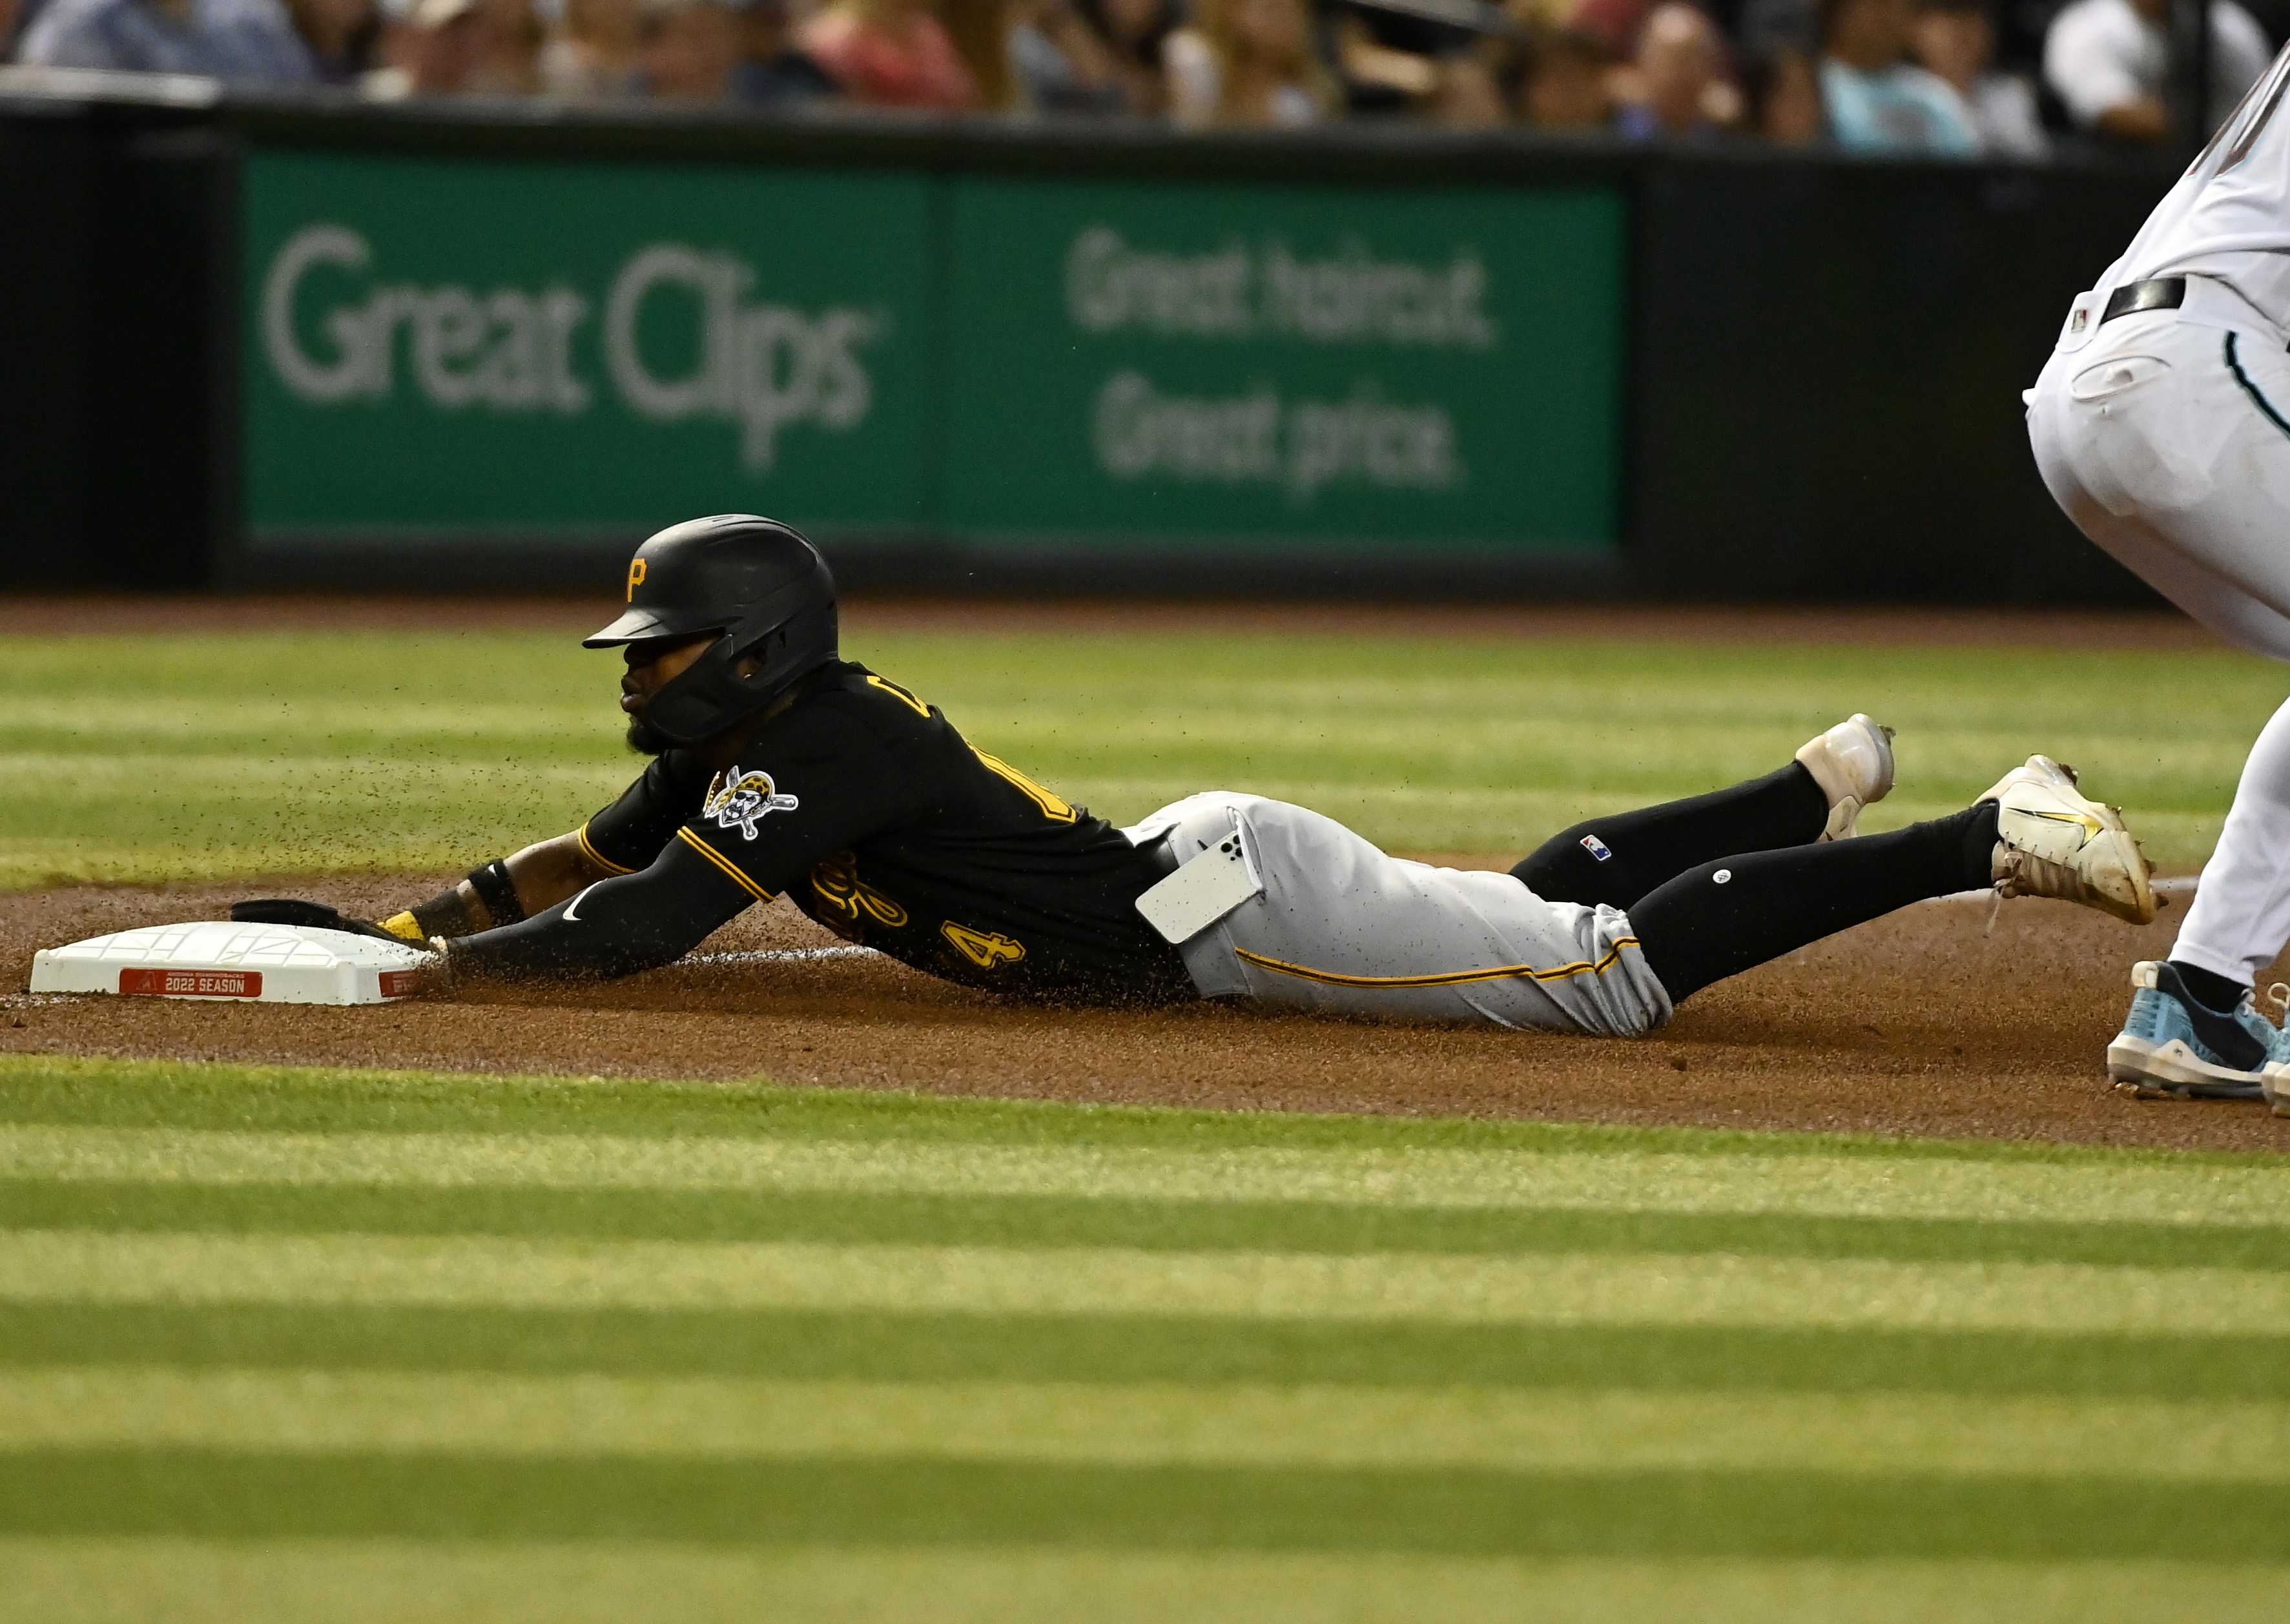 Pirates down Yankees 9-6, lose two players to injury bug - Bucs Dugout